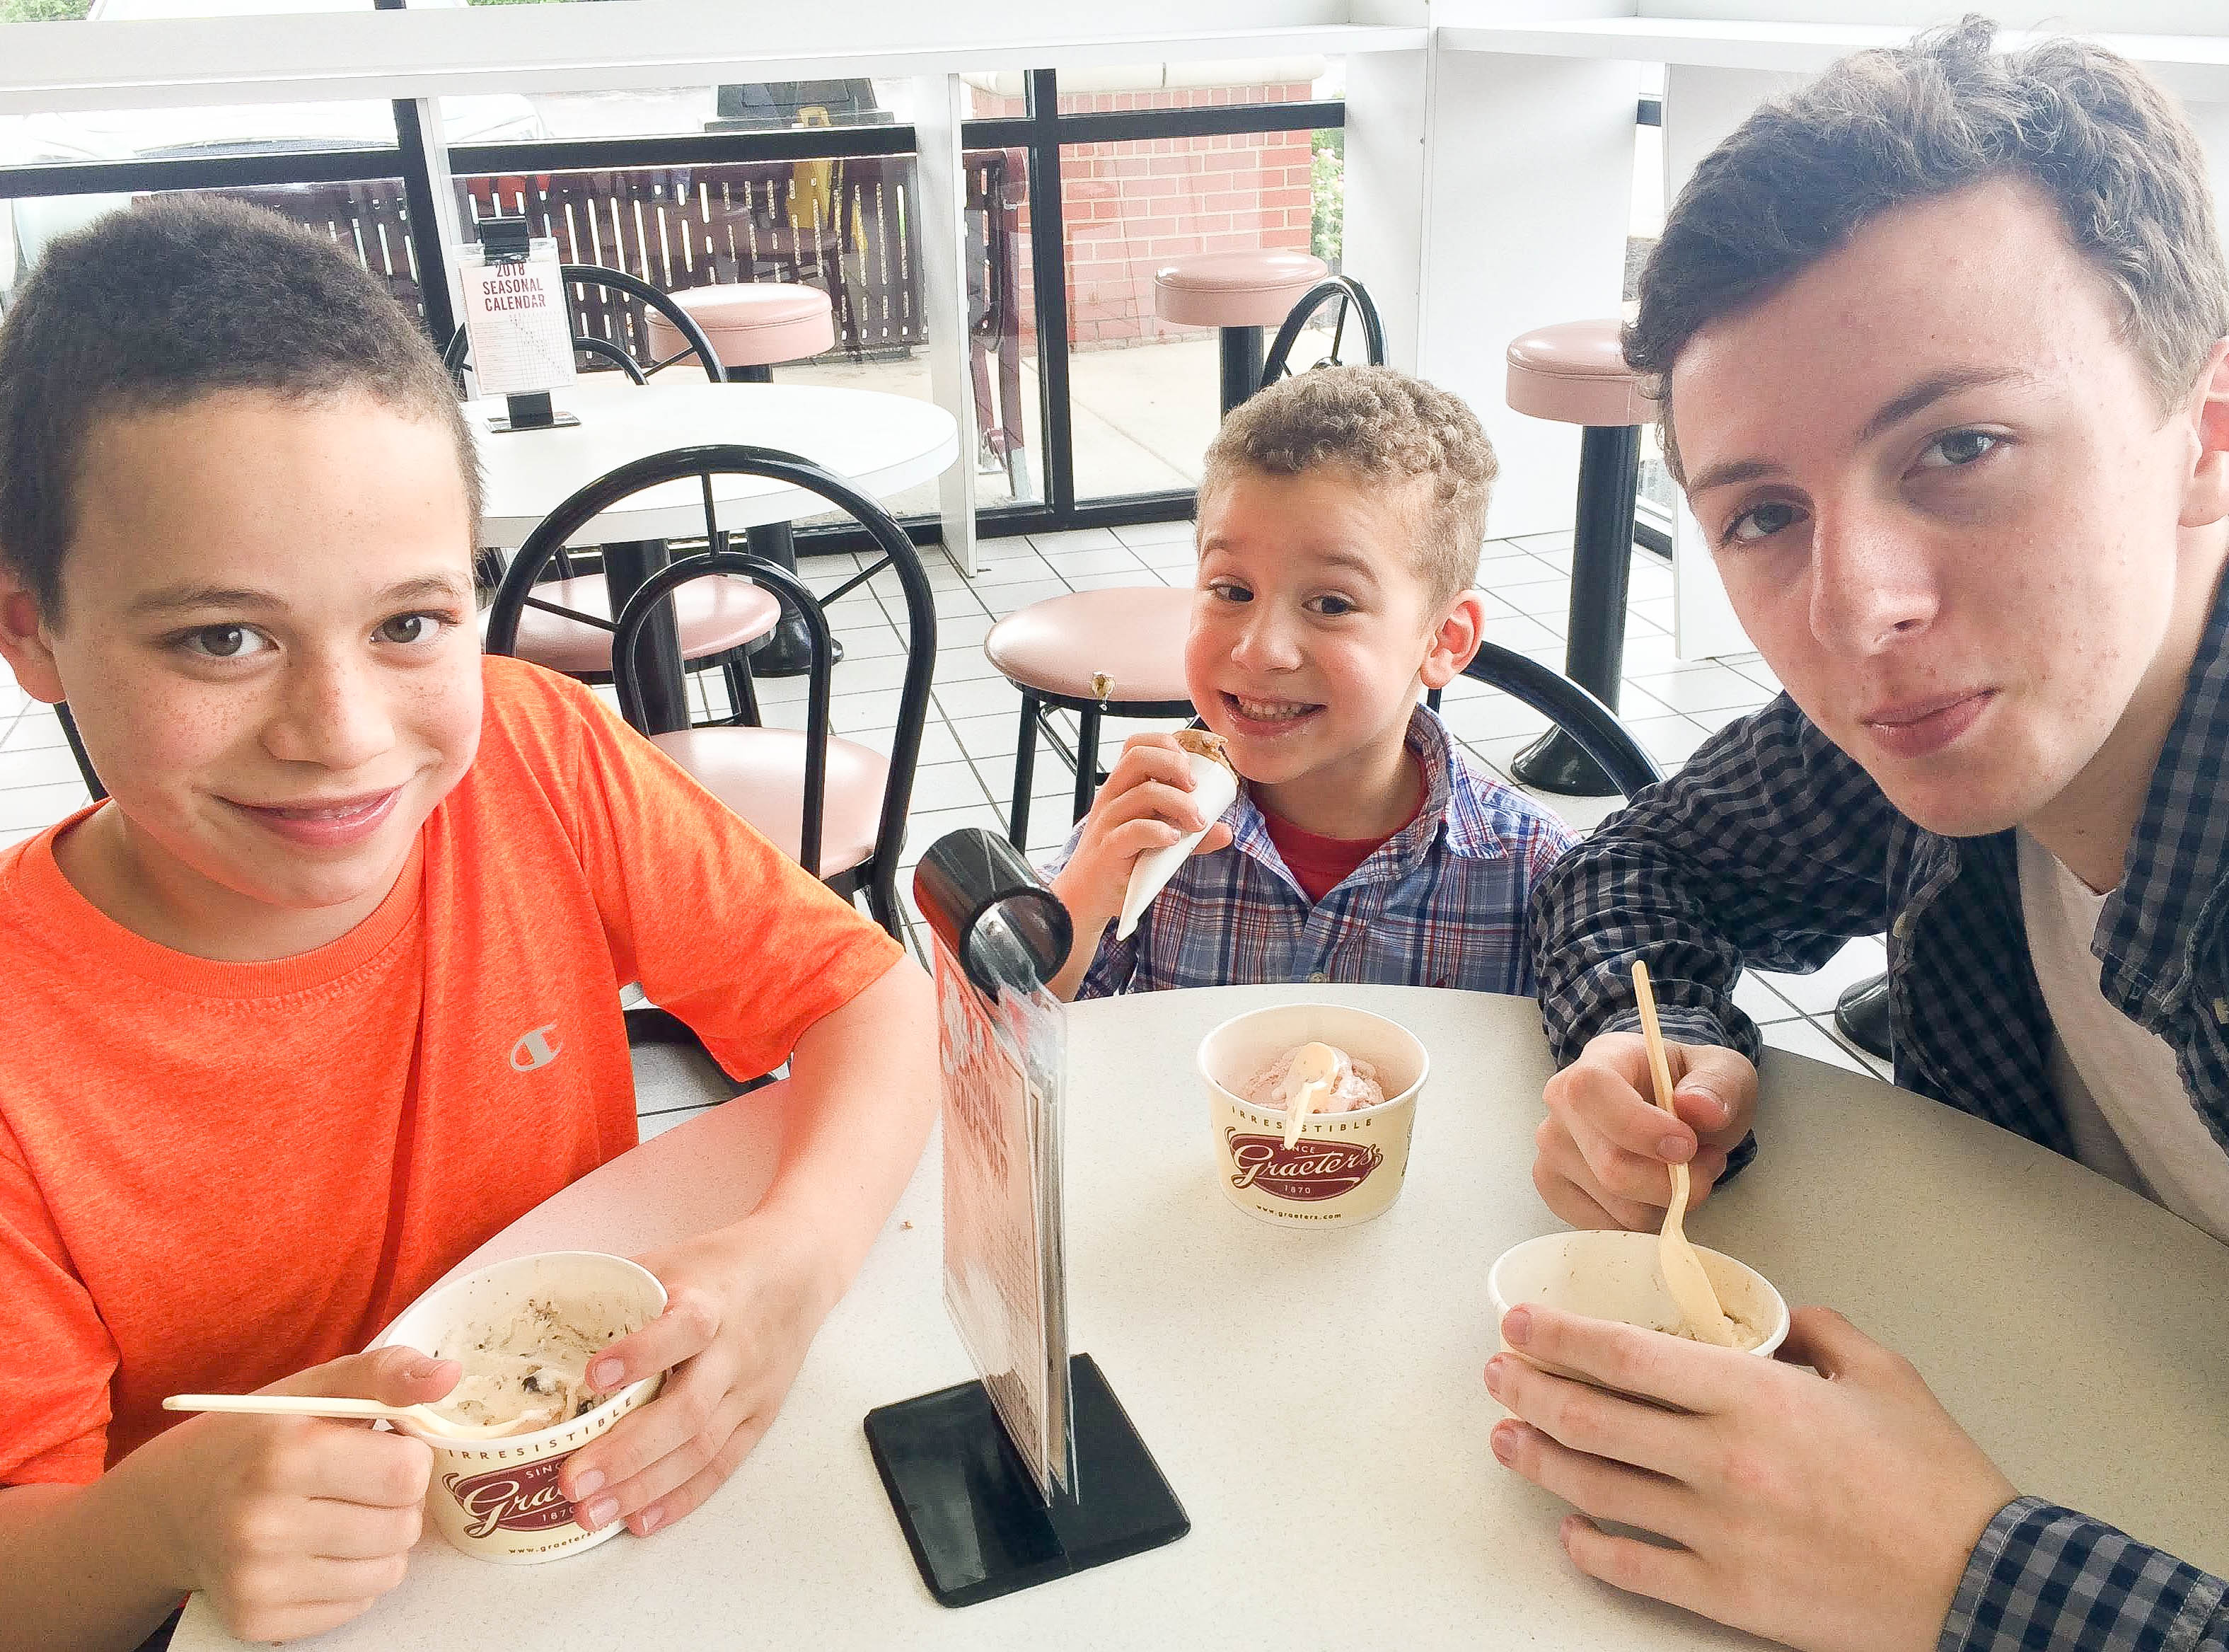 My 3 boys, ages 14, 10 and 3, sitting around a small table eating ice cream